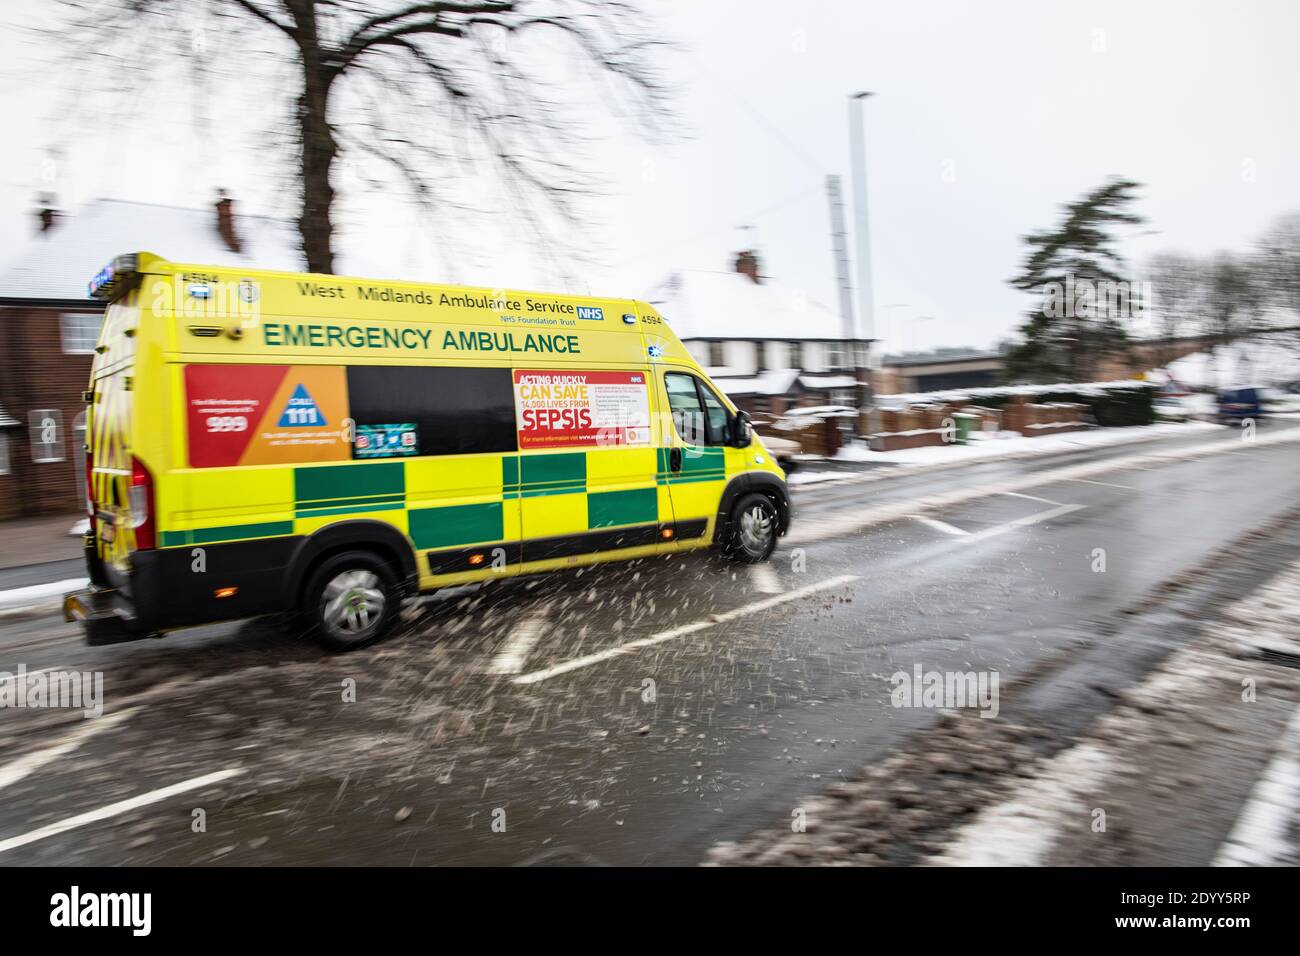 A West Midlands Emergency Ambulance on a 999 call in poor winter weather conditions Stock Photo